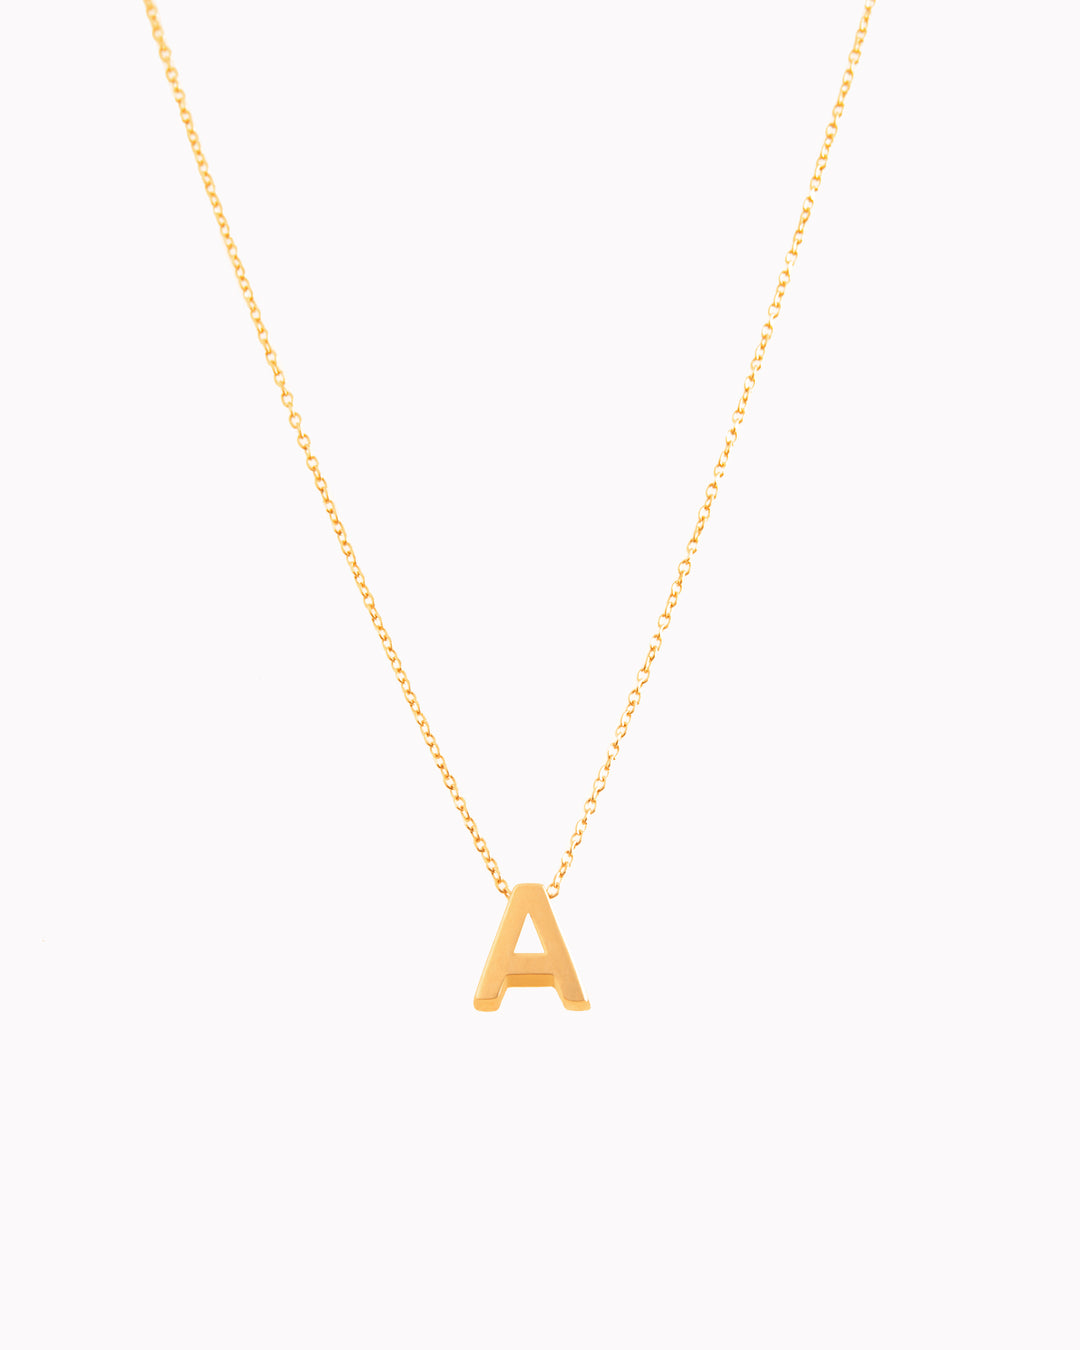 18K GOLD LETTER NECKLACE | INITIAL NECKLACE | LETTER NECKLACES | ALPHABET LETTER NECKLACE | 18K GOLD NECKLACE | VALENTINE GIFT | ANNIVERSARY GIFT | MINIMALIST JEWELLERY